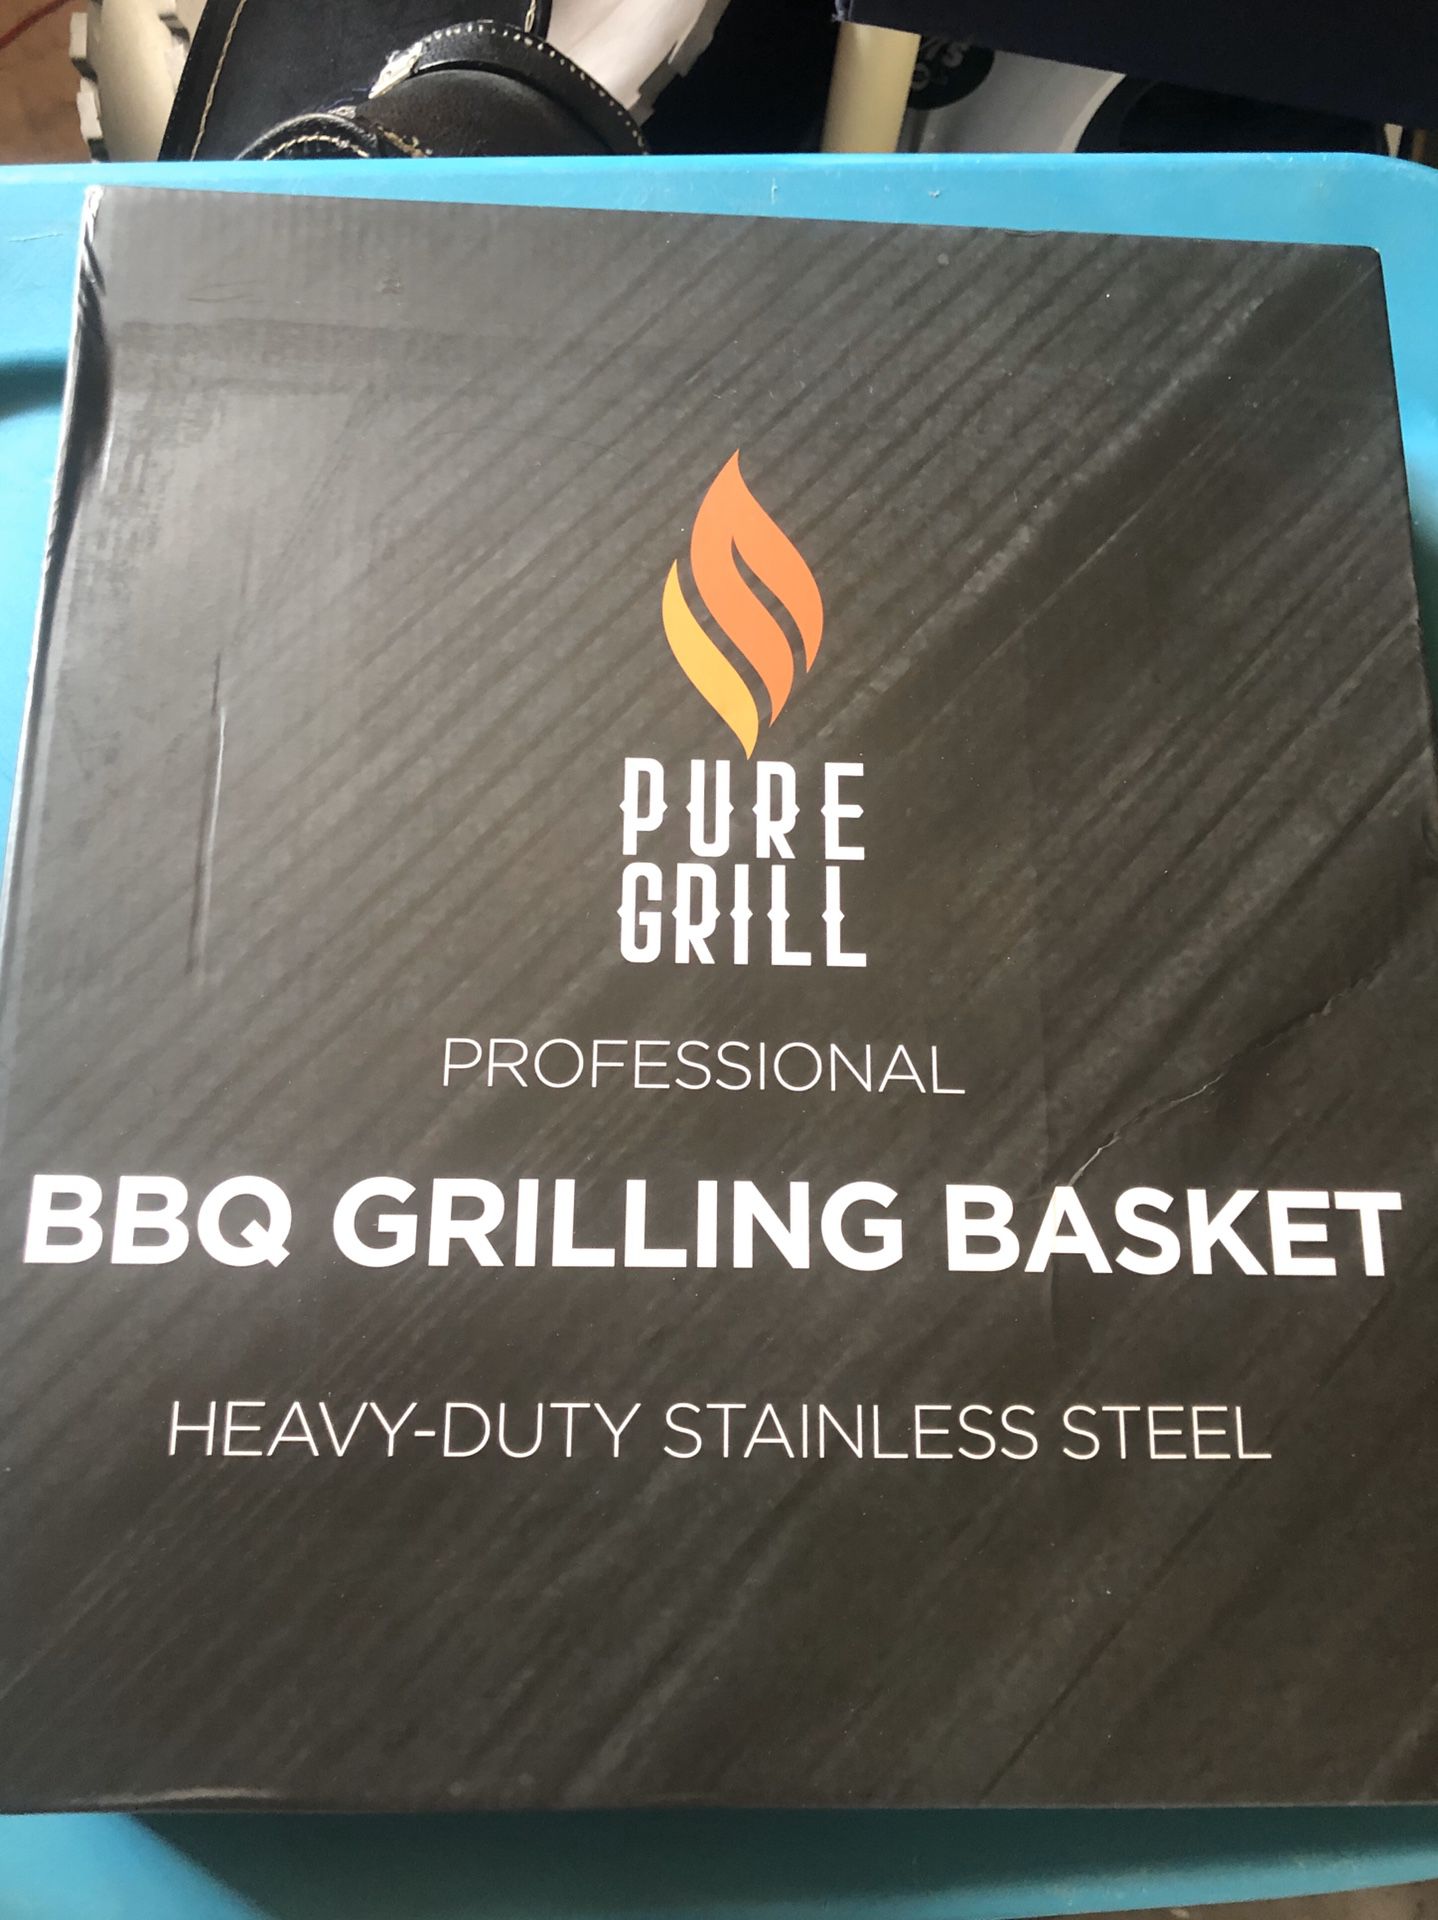 BRAND NEW PURE GRILL STAINLESS STEEL BBQ BARBECUE GRILLING BASKET